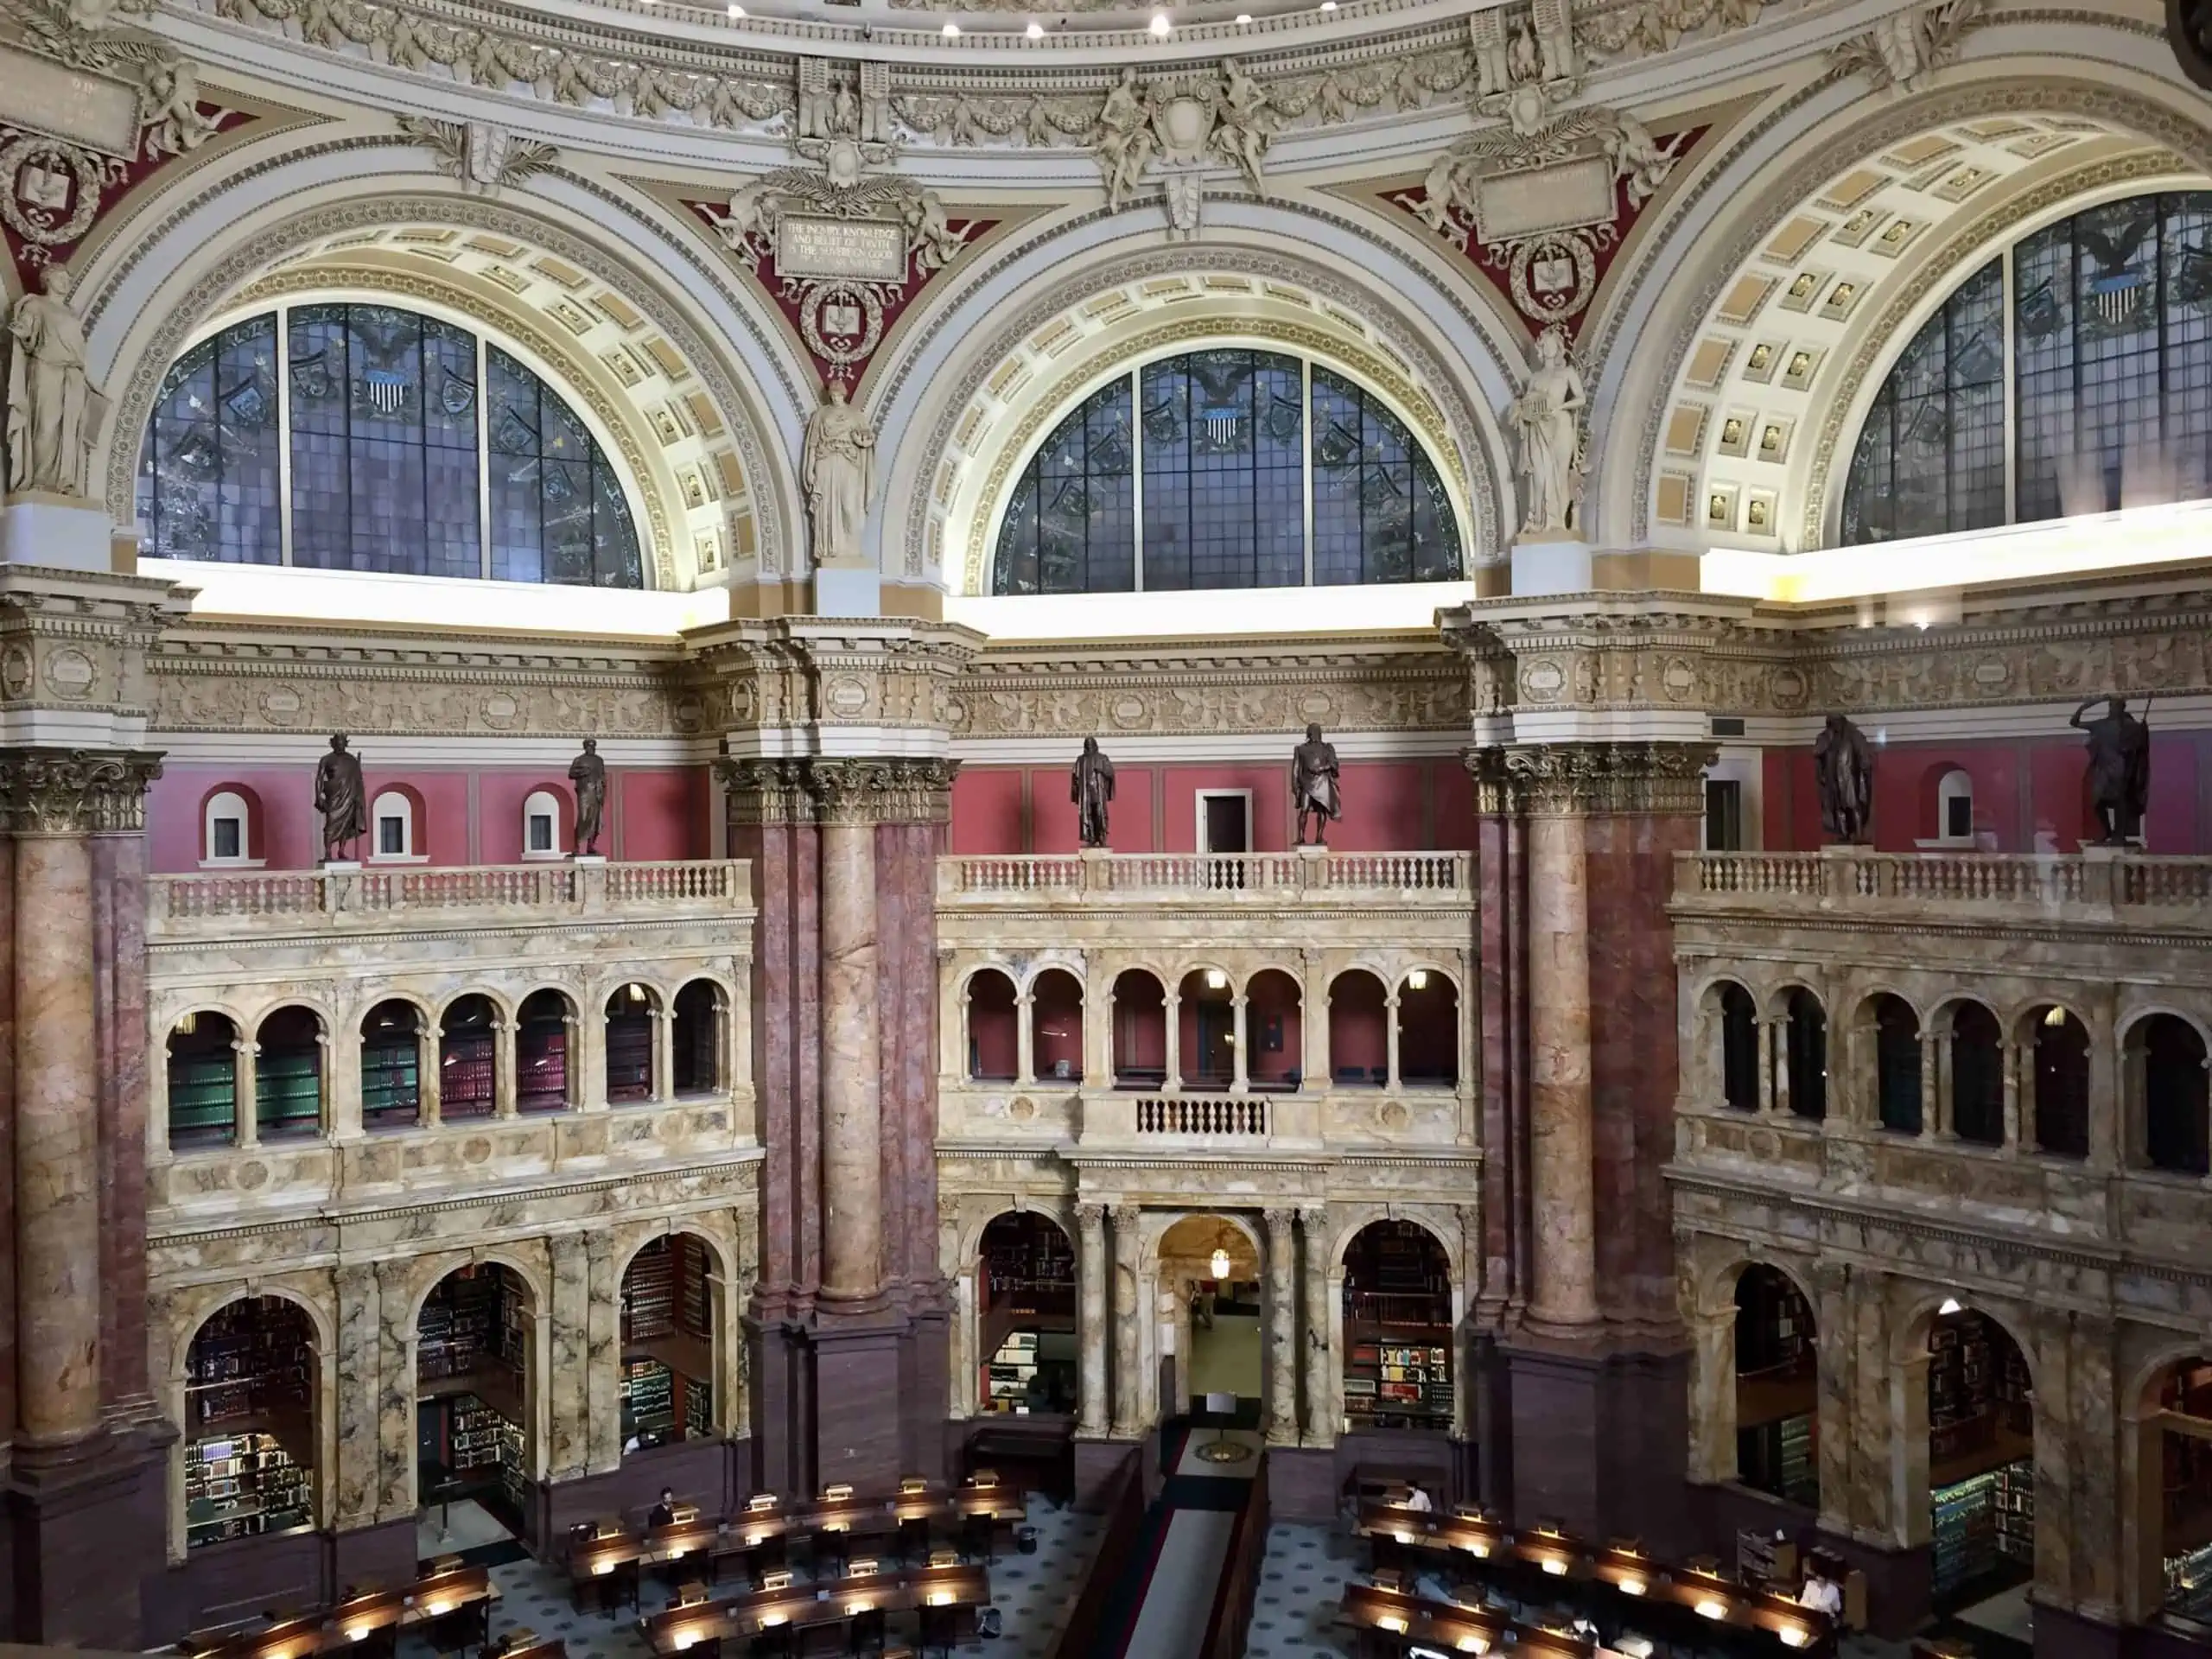 what to do in washington dc in 3 days - this is the most beautiful library I have ever seen and well worth seeing while here on your getaway.